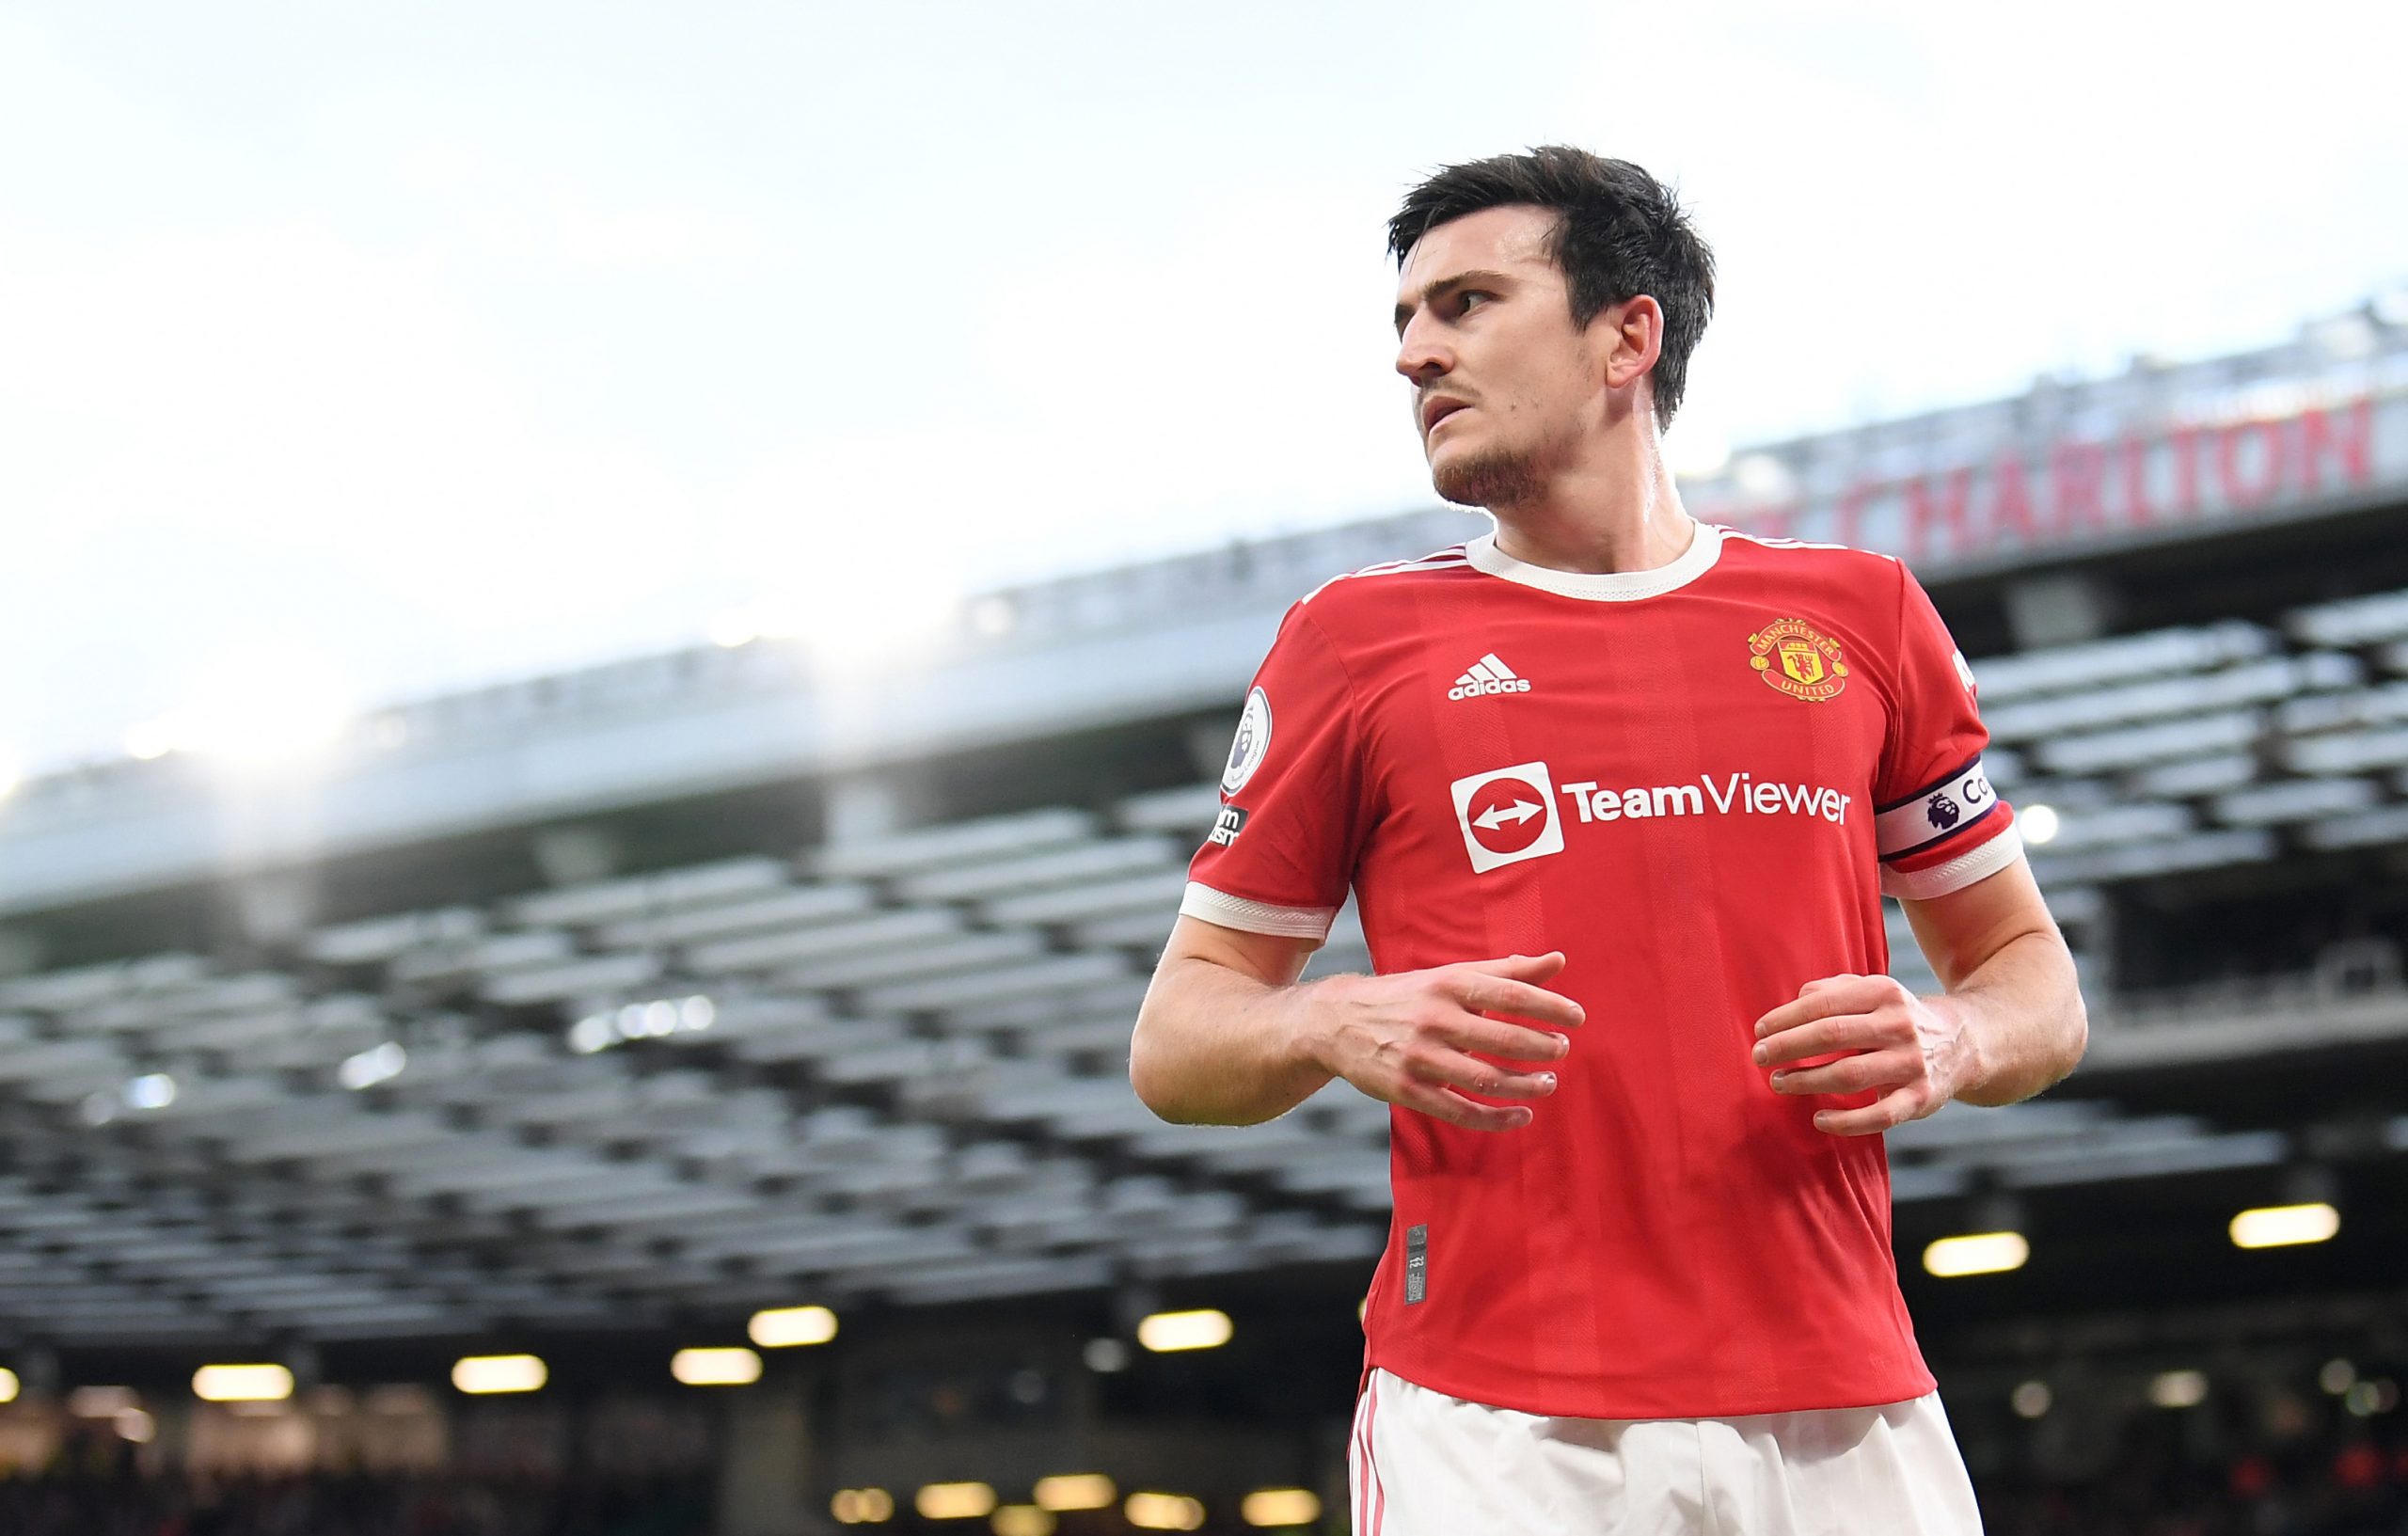 Report: Harry Maguire set to stay at Manchester United despite impending loss of captaincy.